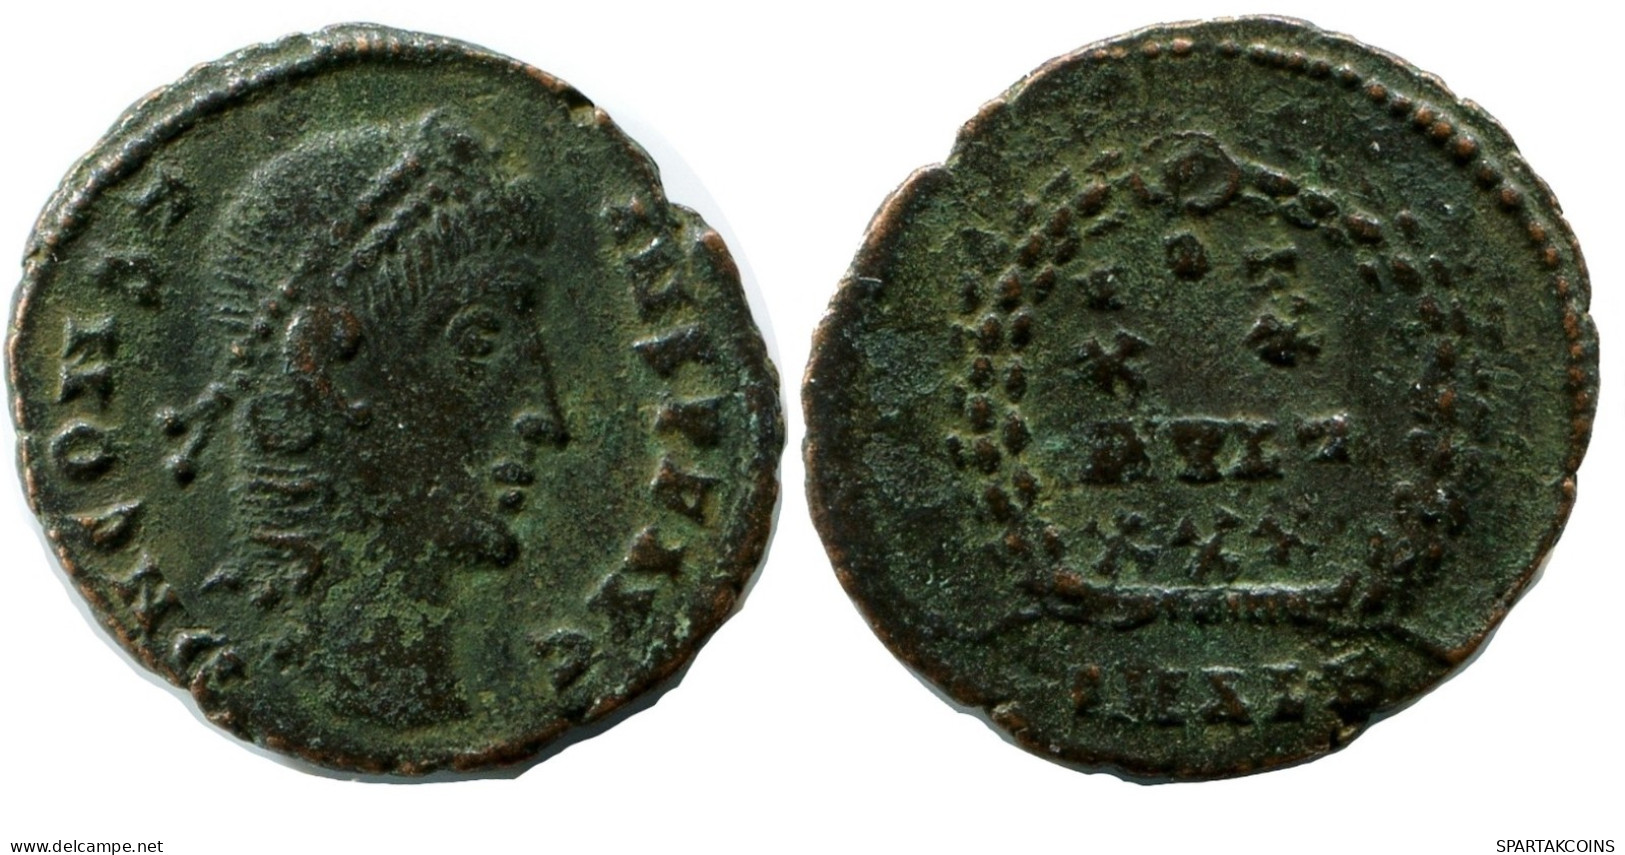 CONSTANS MINTED IN ALEKSANDRIA FROM THE ROYAL ONTARIO MUSEUM #ANC11365.14.E.A - Der Christlischen Kaiser (307 / 363)